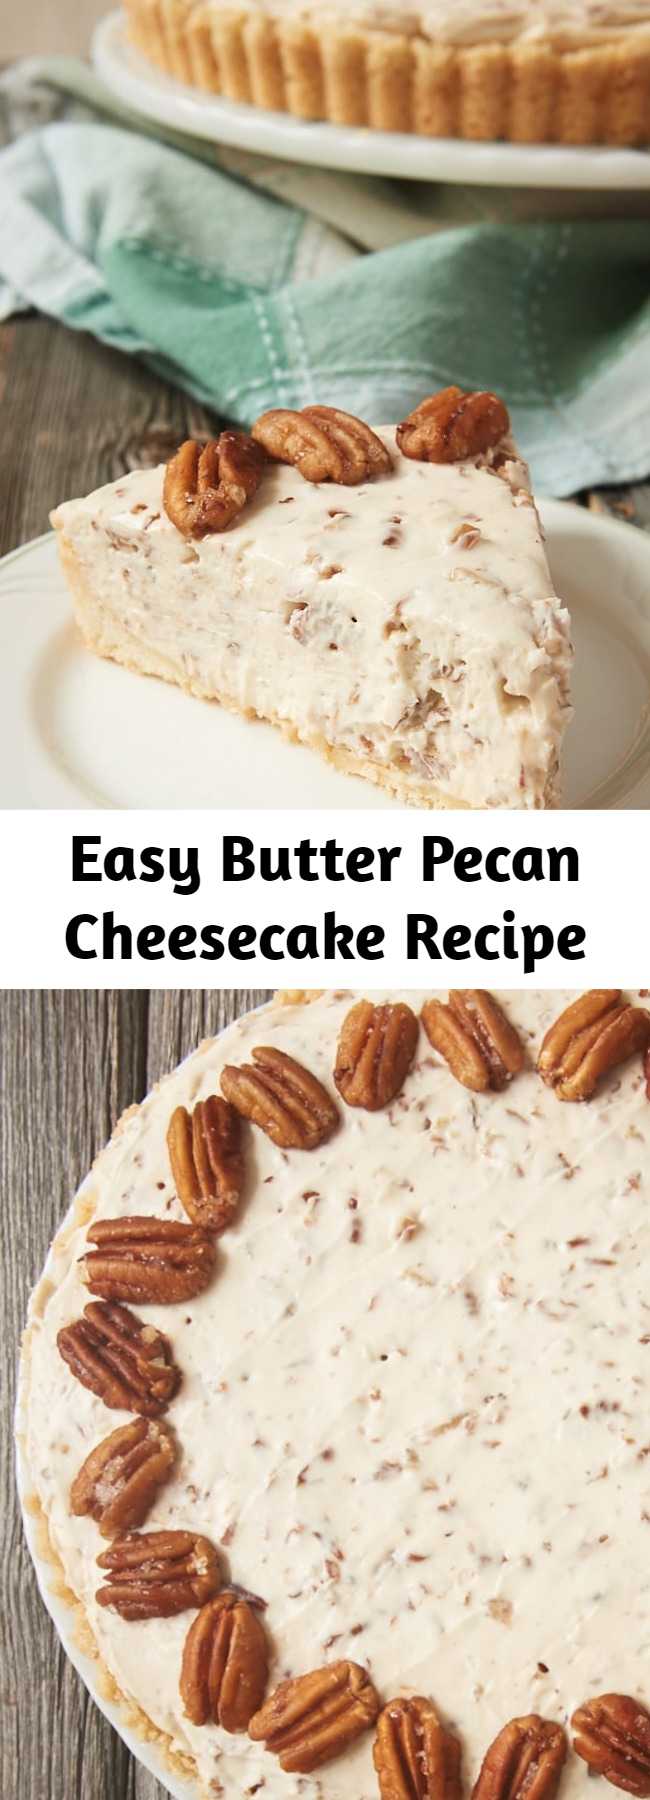 Easy Butter Pecan Cheesecake Recipe - Buttery toasted pecans add big flavor to this Butter Pecan Cheesecake!